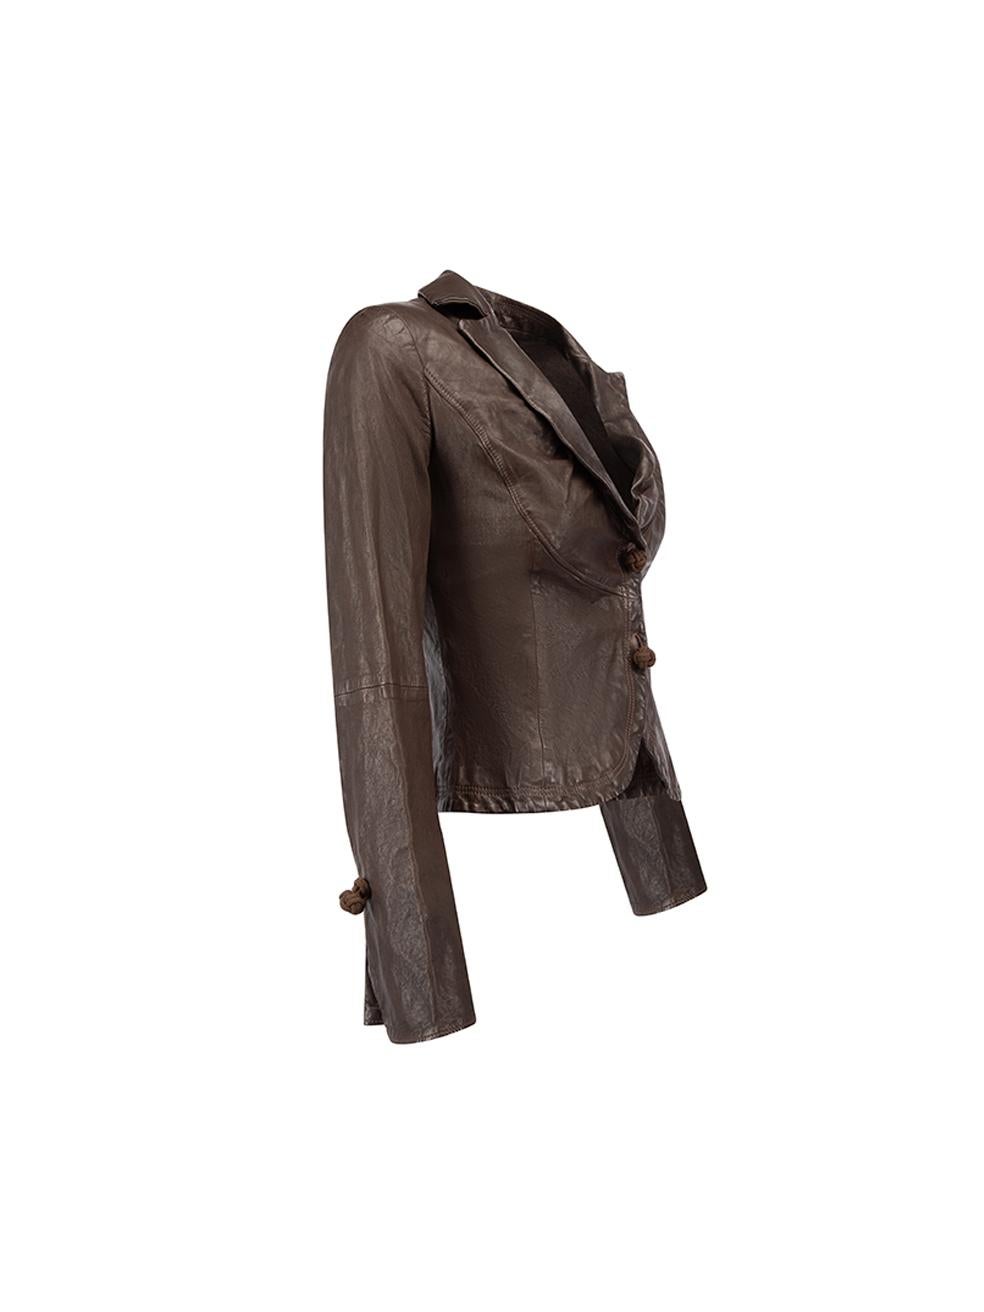 CONDITION is Very good. Minimal wear to jacket is evident. Minimal wear to bottom-left button with loosening of thread on this used Emporio Armani designer resale item. 



Details


Brown

Leather

Fitted jacket

Knot buttons accent

Single